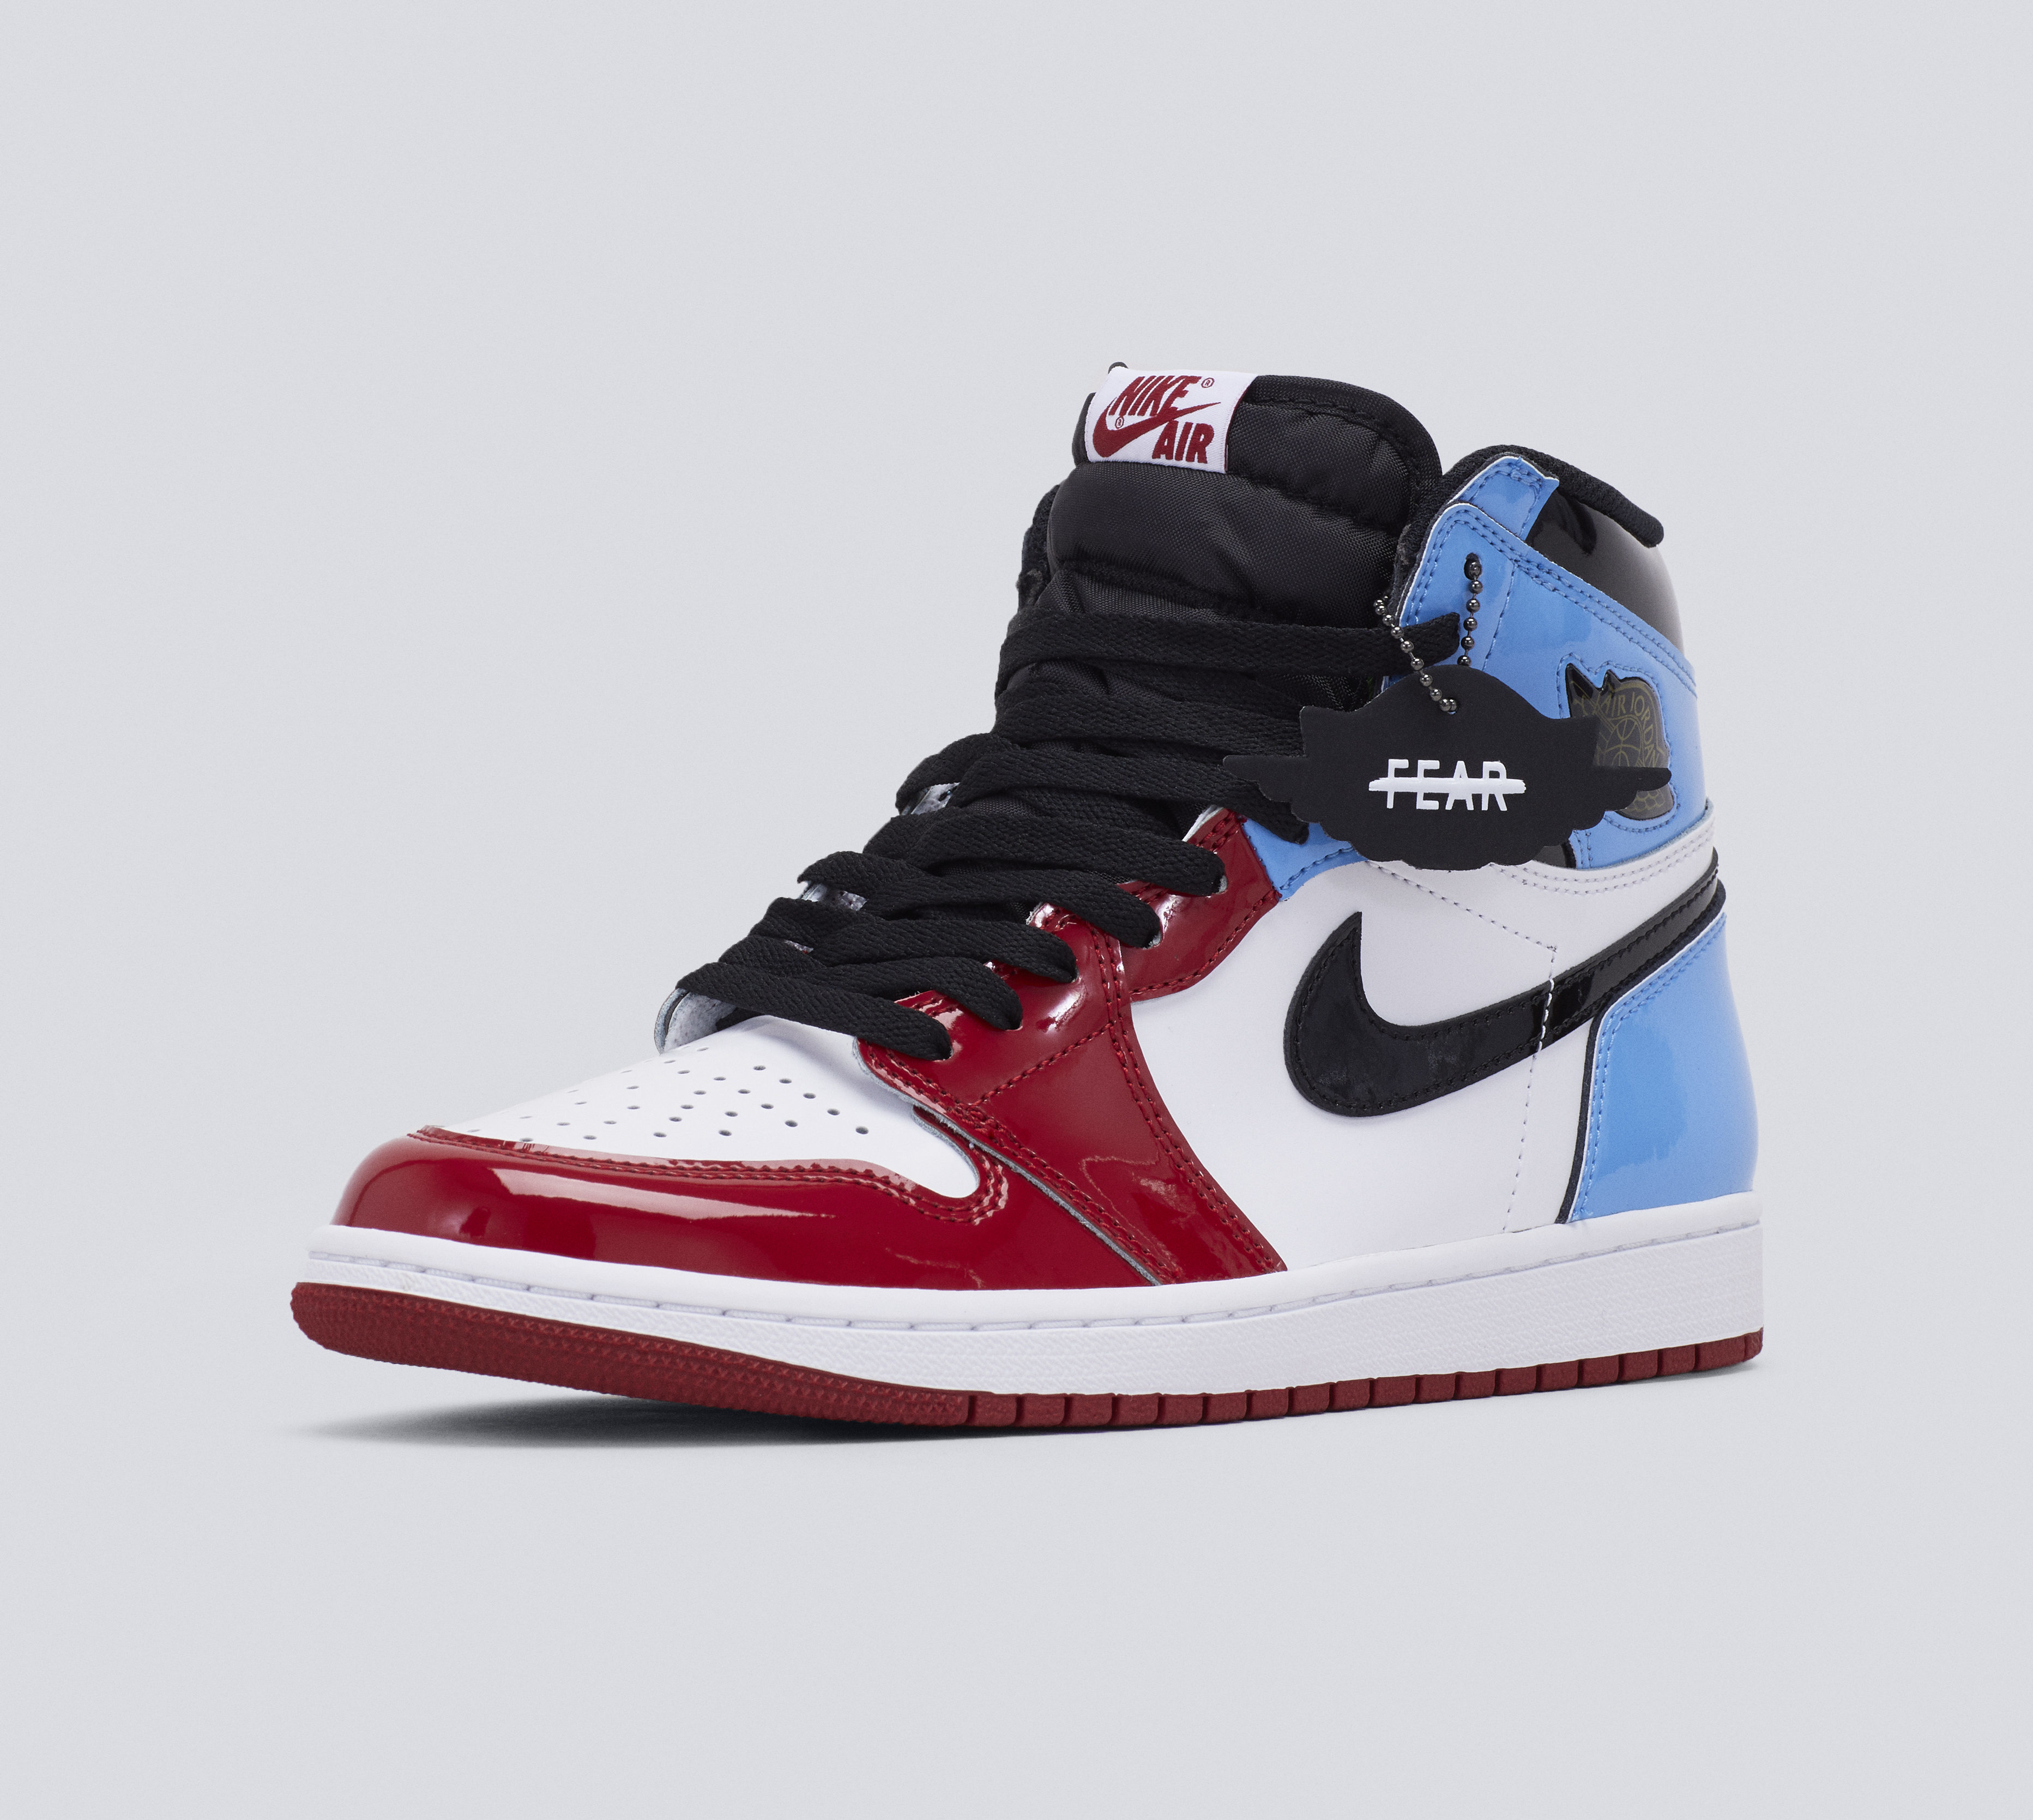 Jordan 1 Fearless UNC Chicago - By The Numbers - StockX News